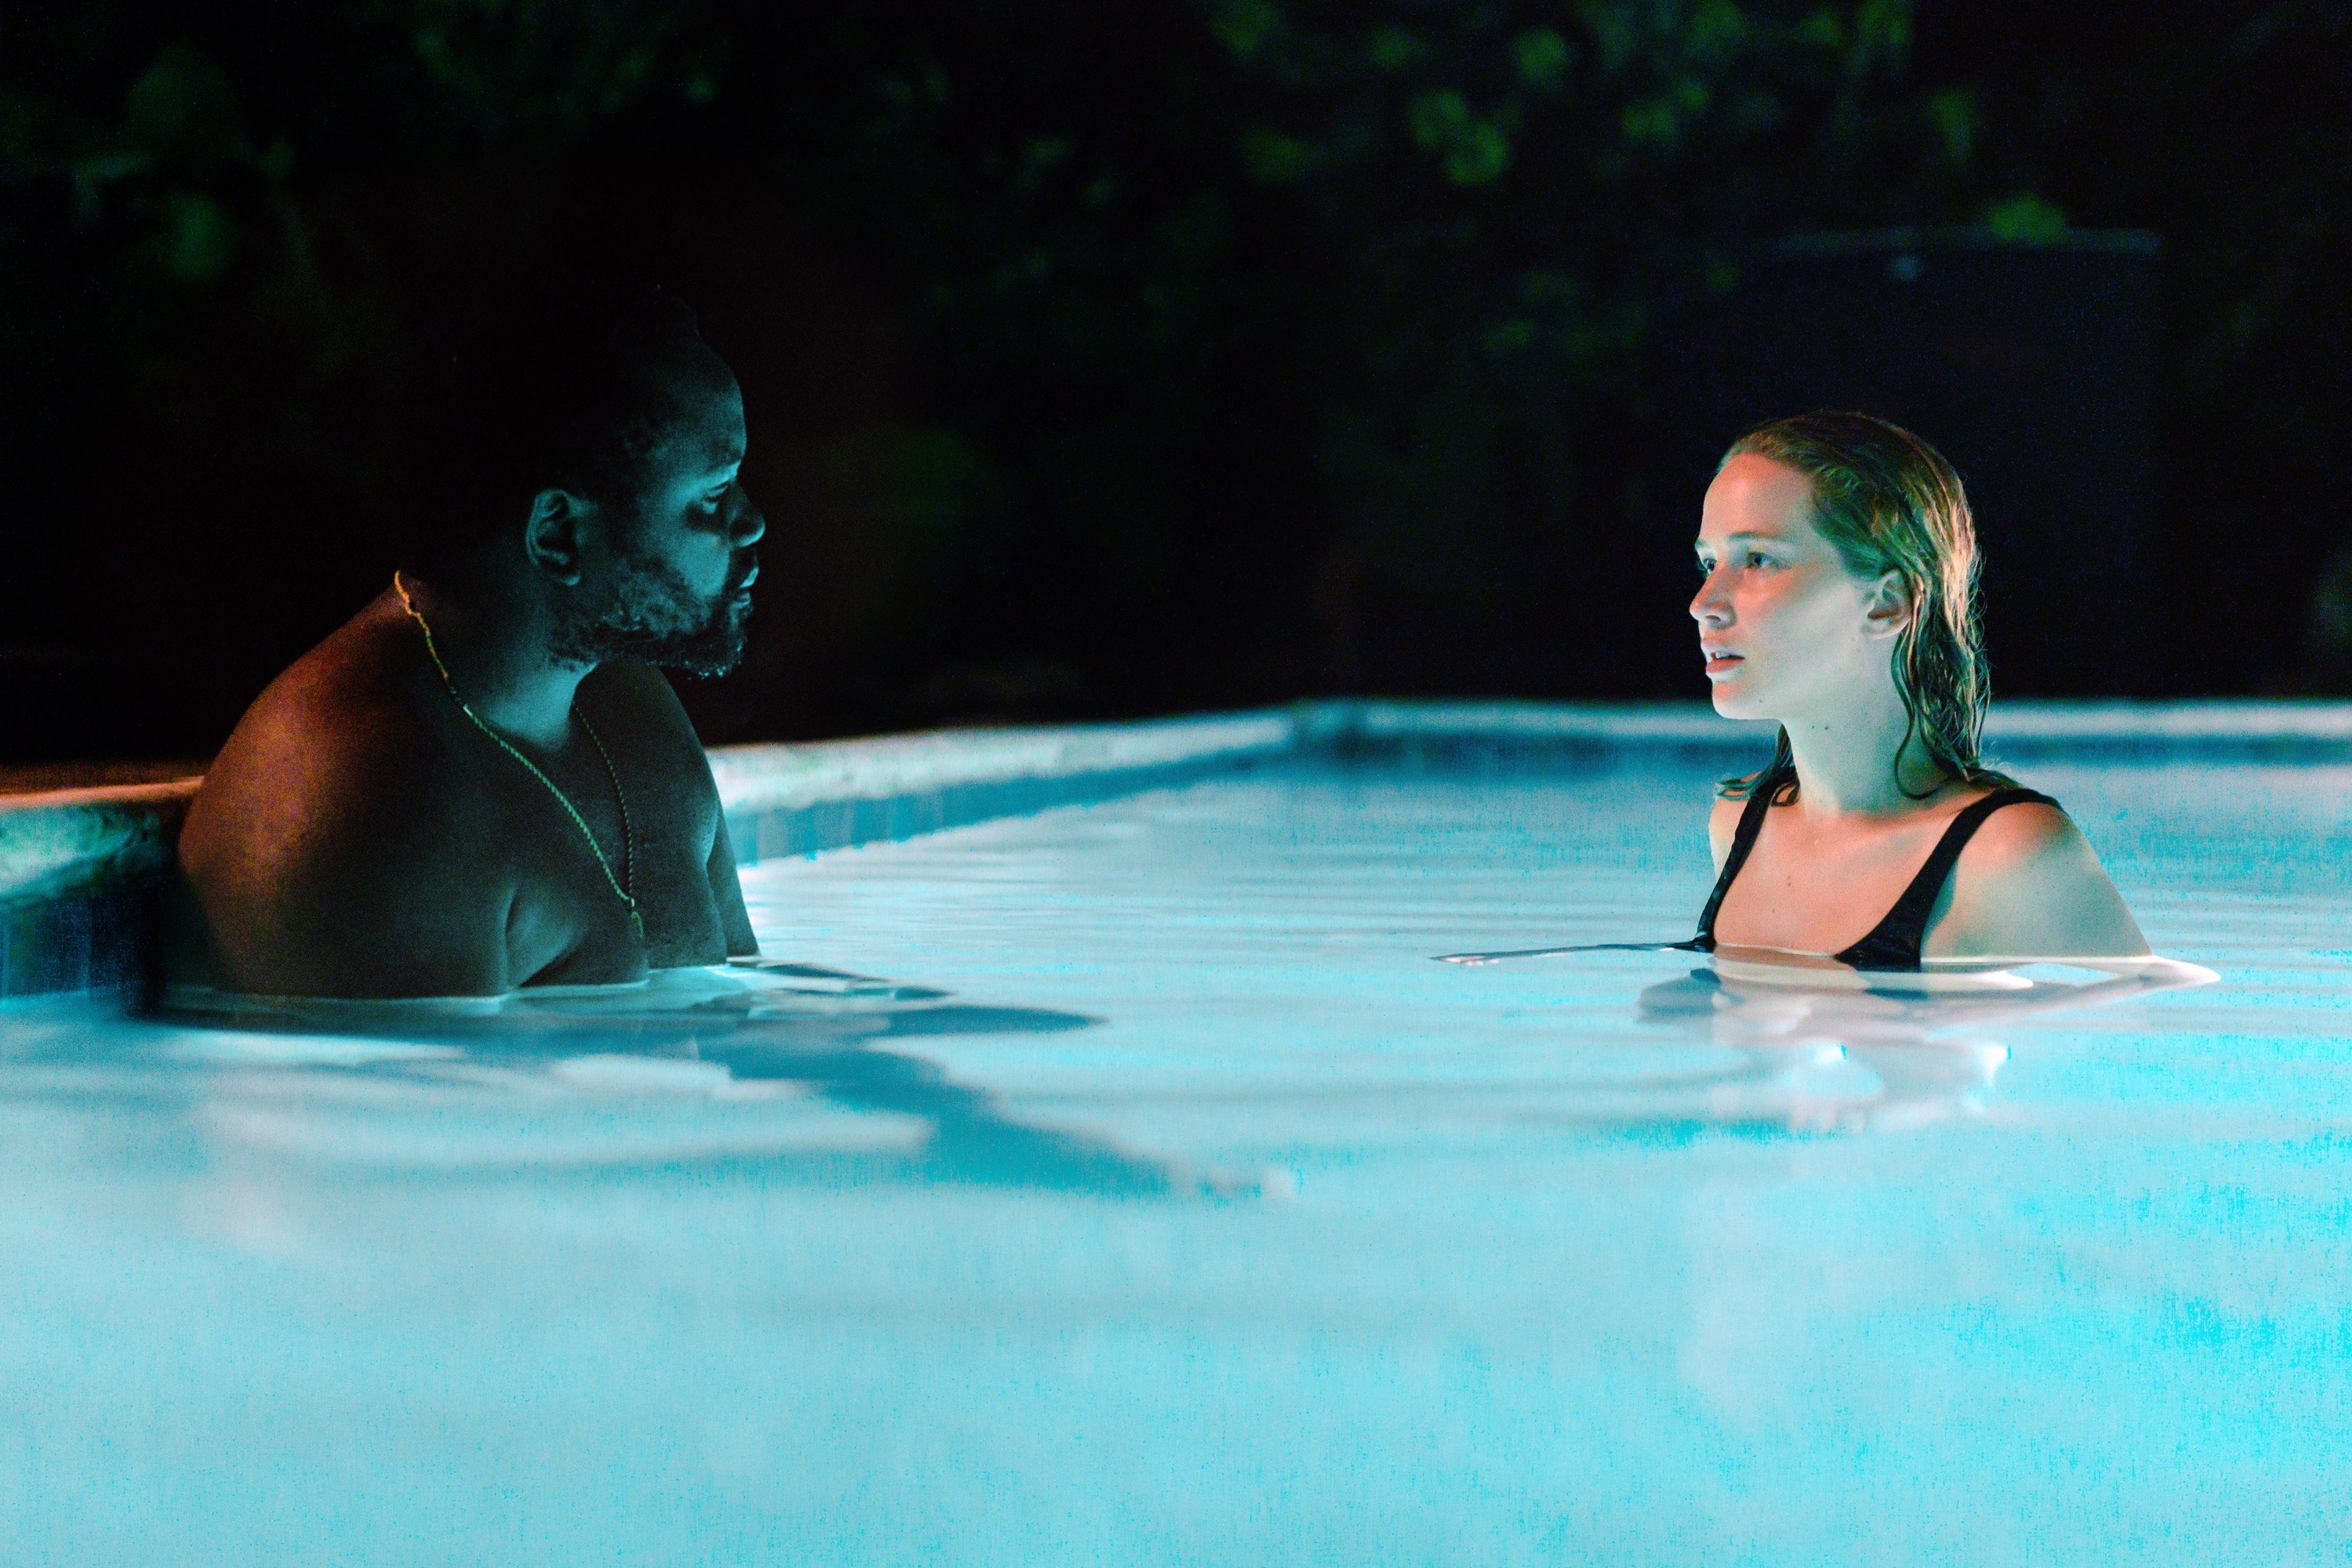 Brian Tyree Henry and Jennifer Lawrence in a swimming pool